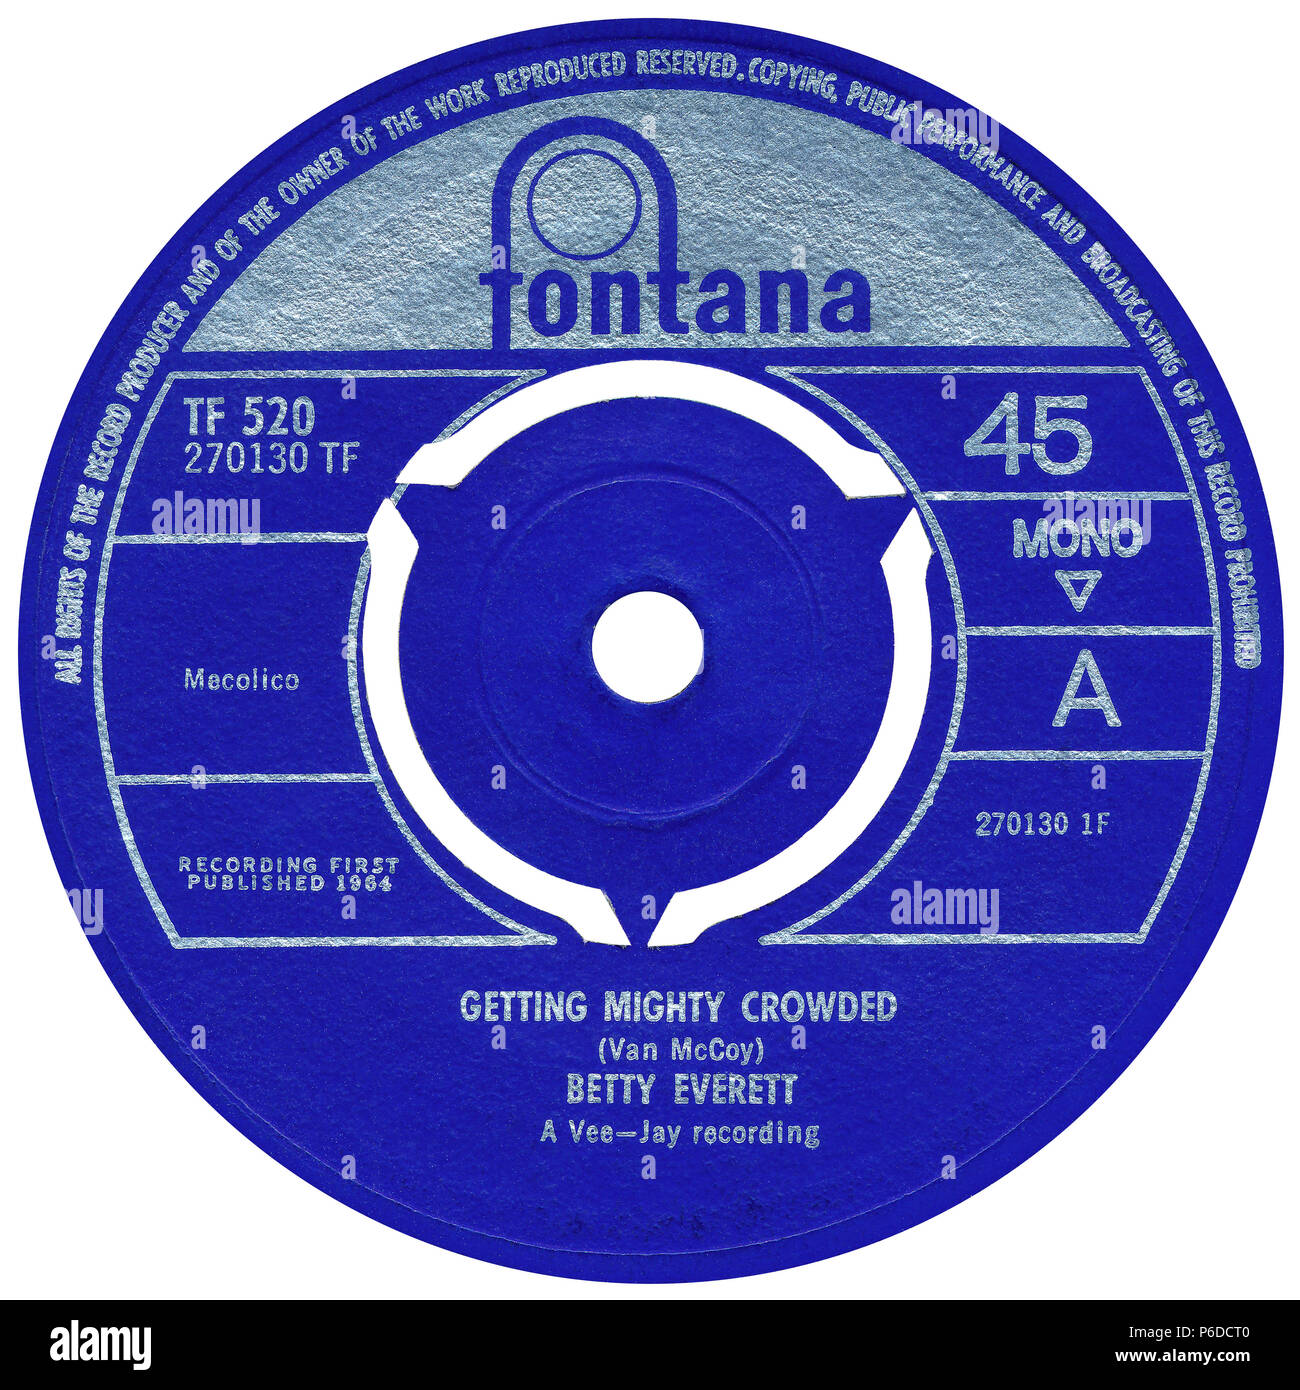 U.K. 45 rpm 7' single of Getting Mighty Crowded by Betty Everett on the Fontana label from 1964. Written by Van McCoy. Stock Photo